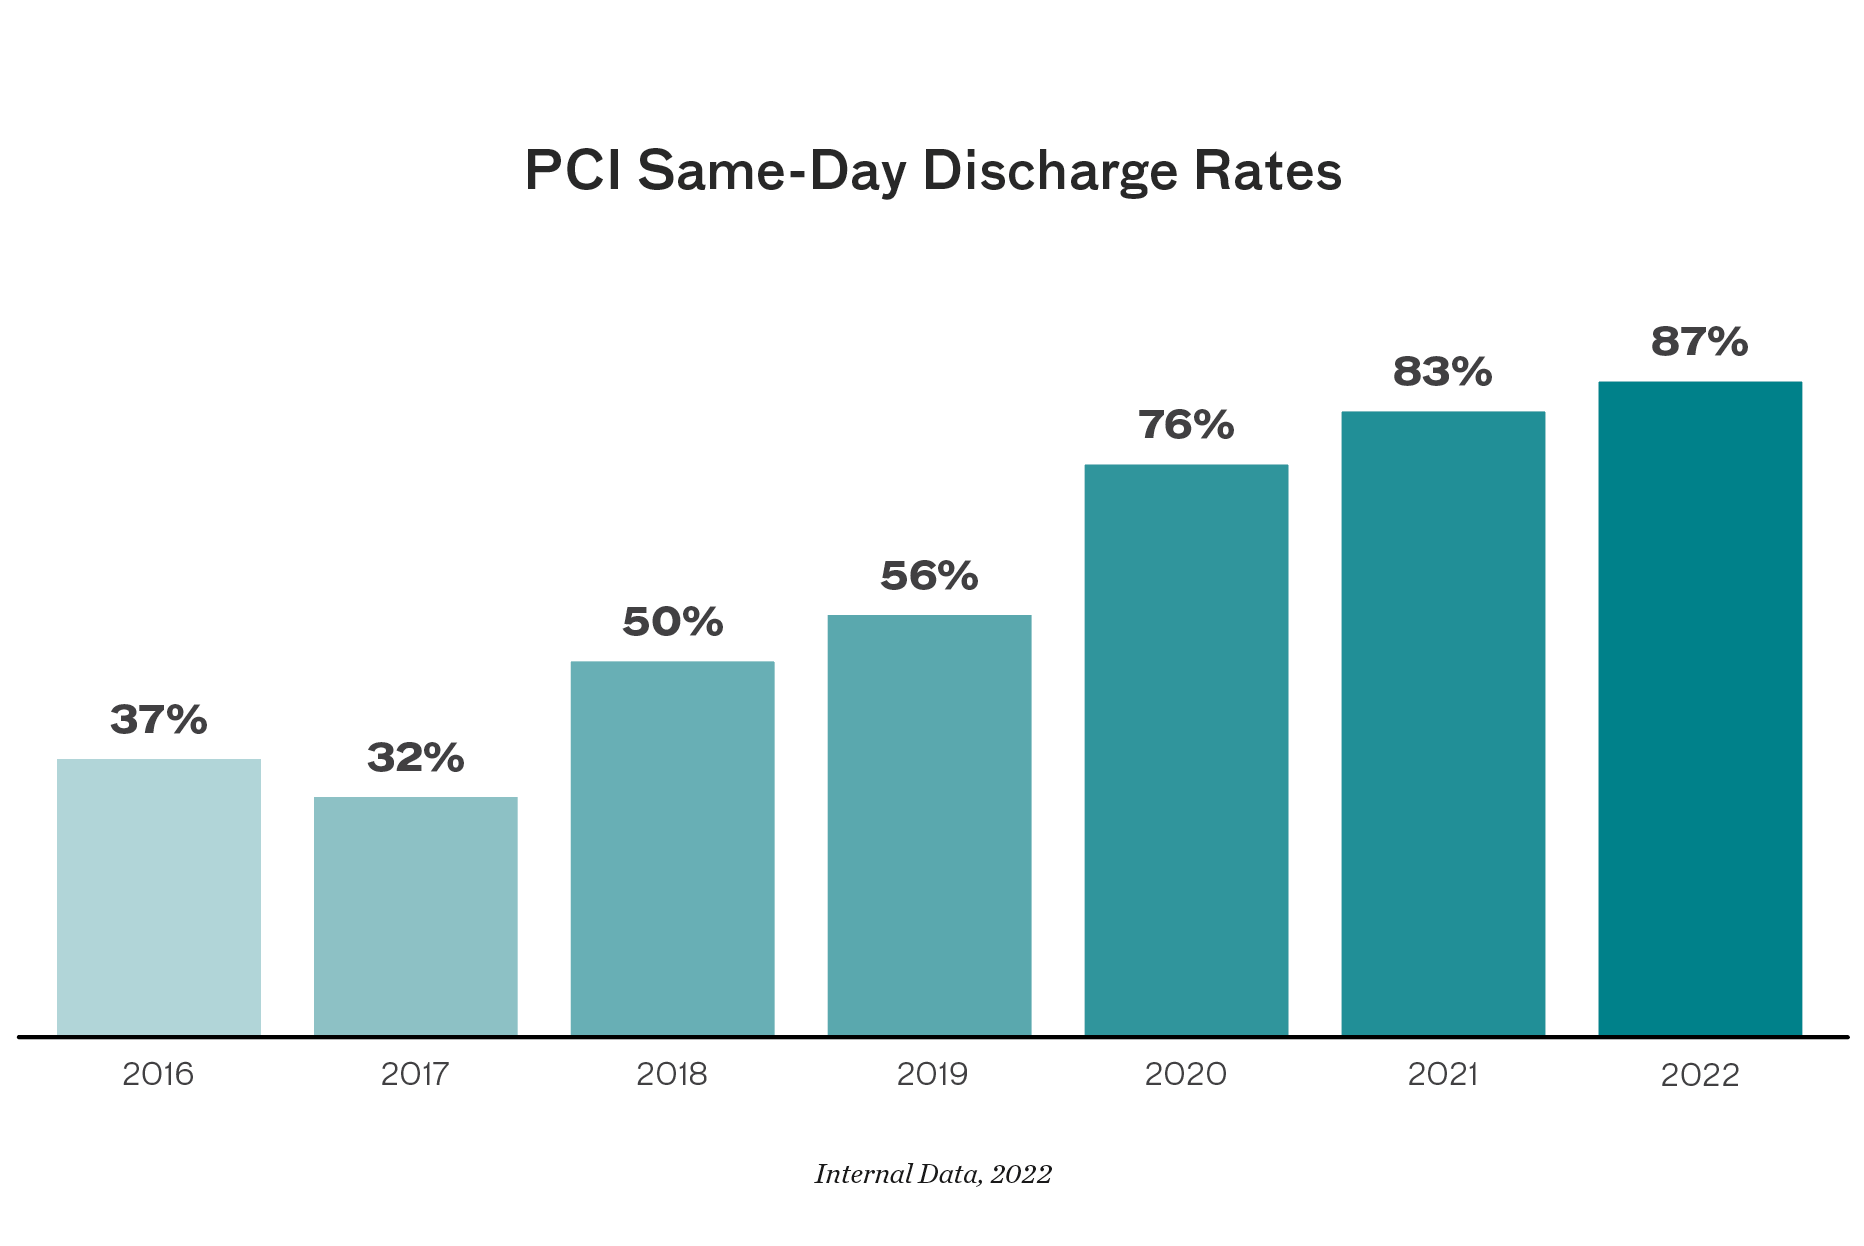 Bar graph depicting SHVI improving in PCI Same-Day Discharge Rates over time, from 37% in 2016, to 87% in 2022.